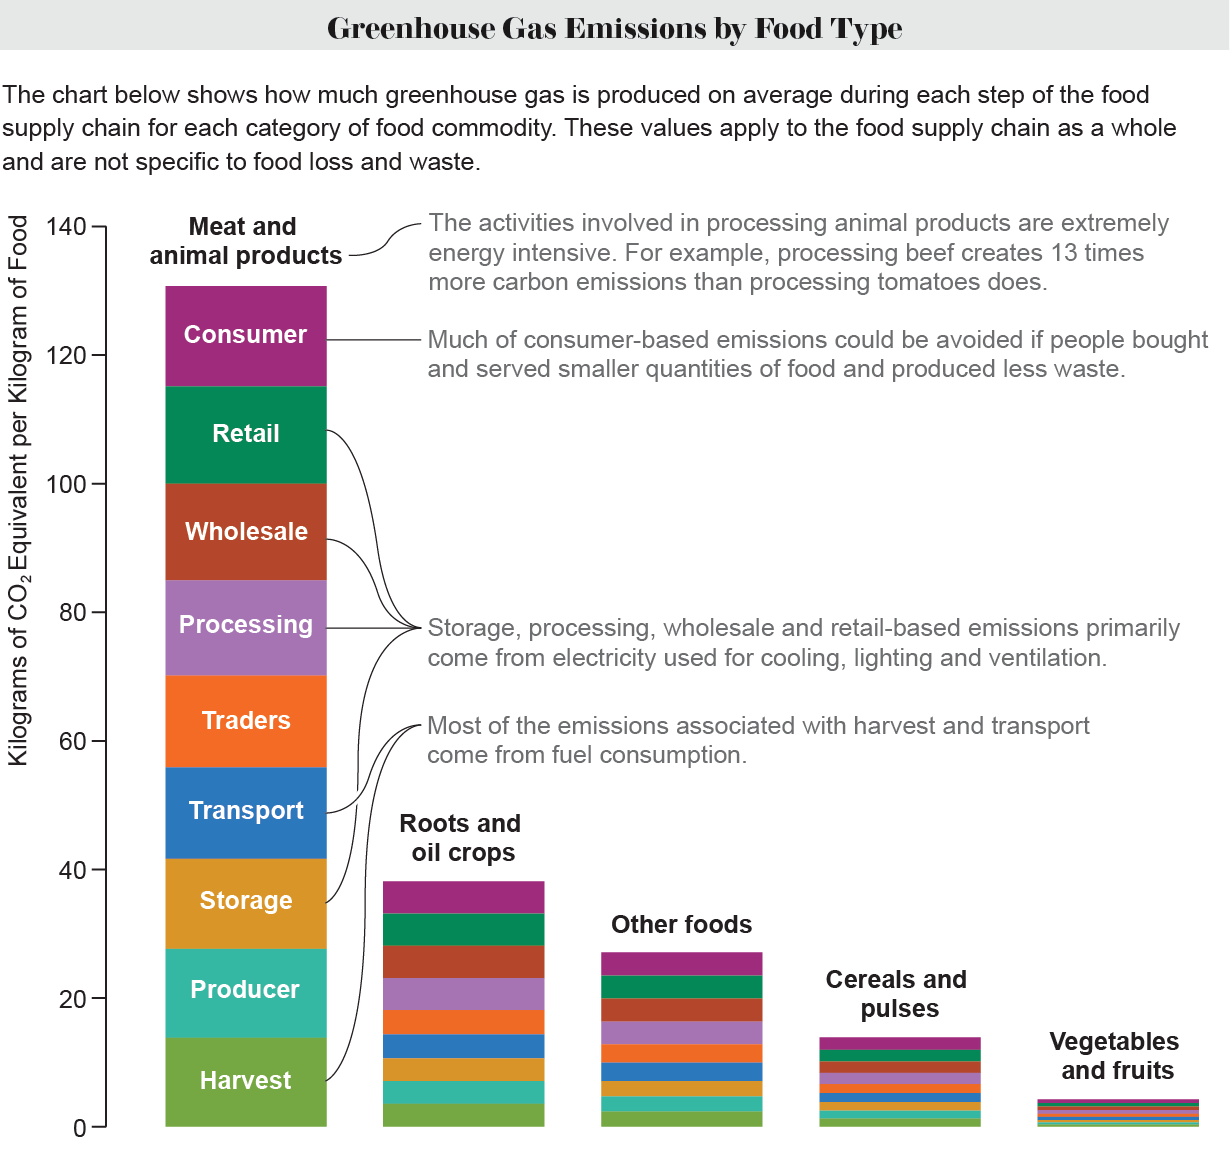 Stacked bar chart shows average amount of greenhouse gas emissions produced per unit of food at each step of the food supply chain in five food categories, with meat and animal products resulting in the most emissions by far.